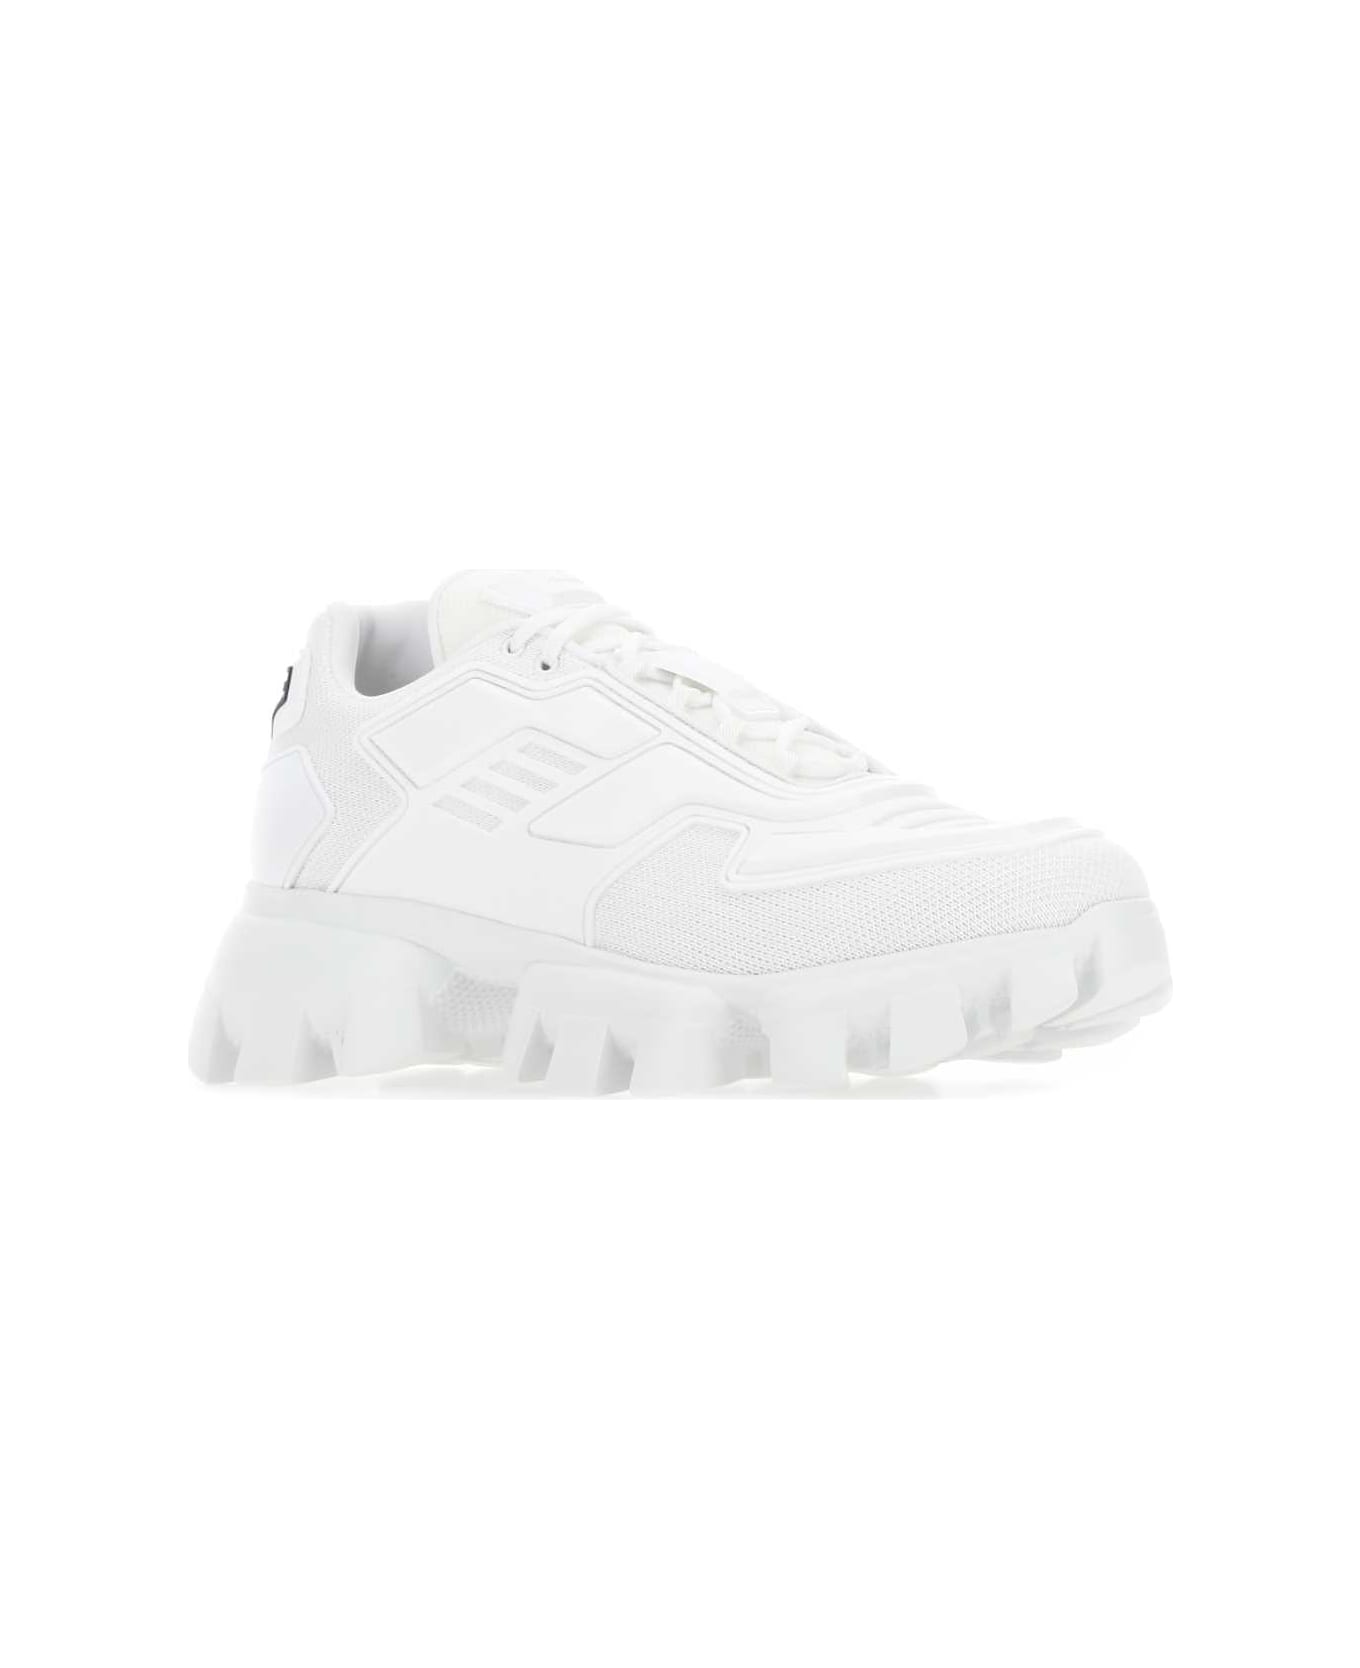 Prada White Rubber And Mesh Cloudbust Thunder Sneakers - F0009